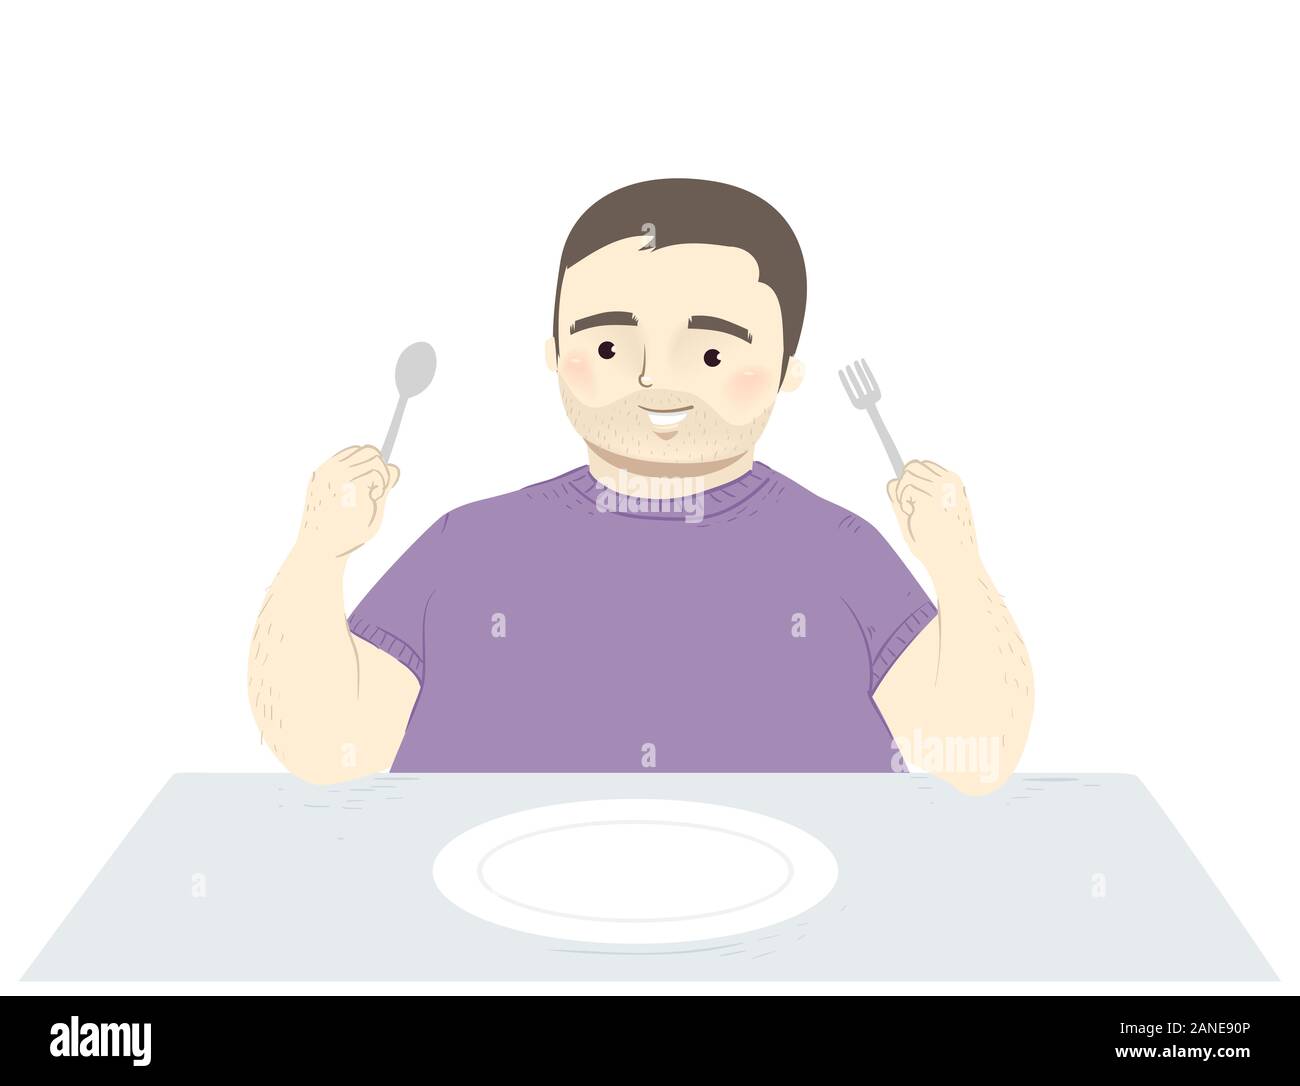 Illustration of a Fat Man Holding Spoon and Fork and Ready to Eat with an Empty Plate on the Table Stock Photo